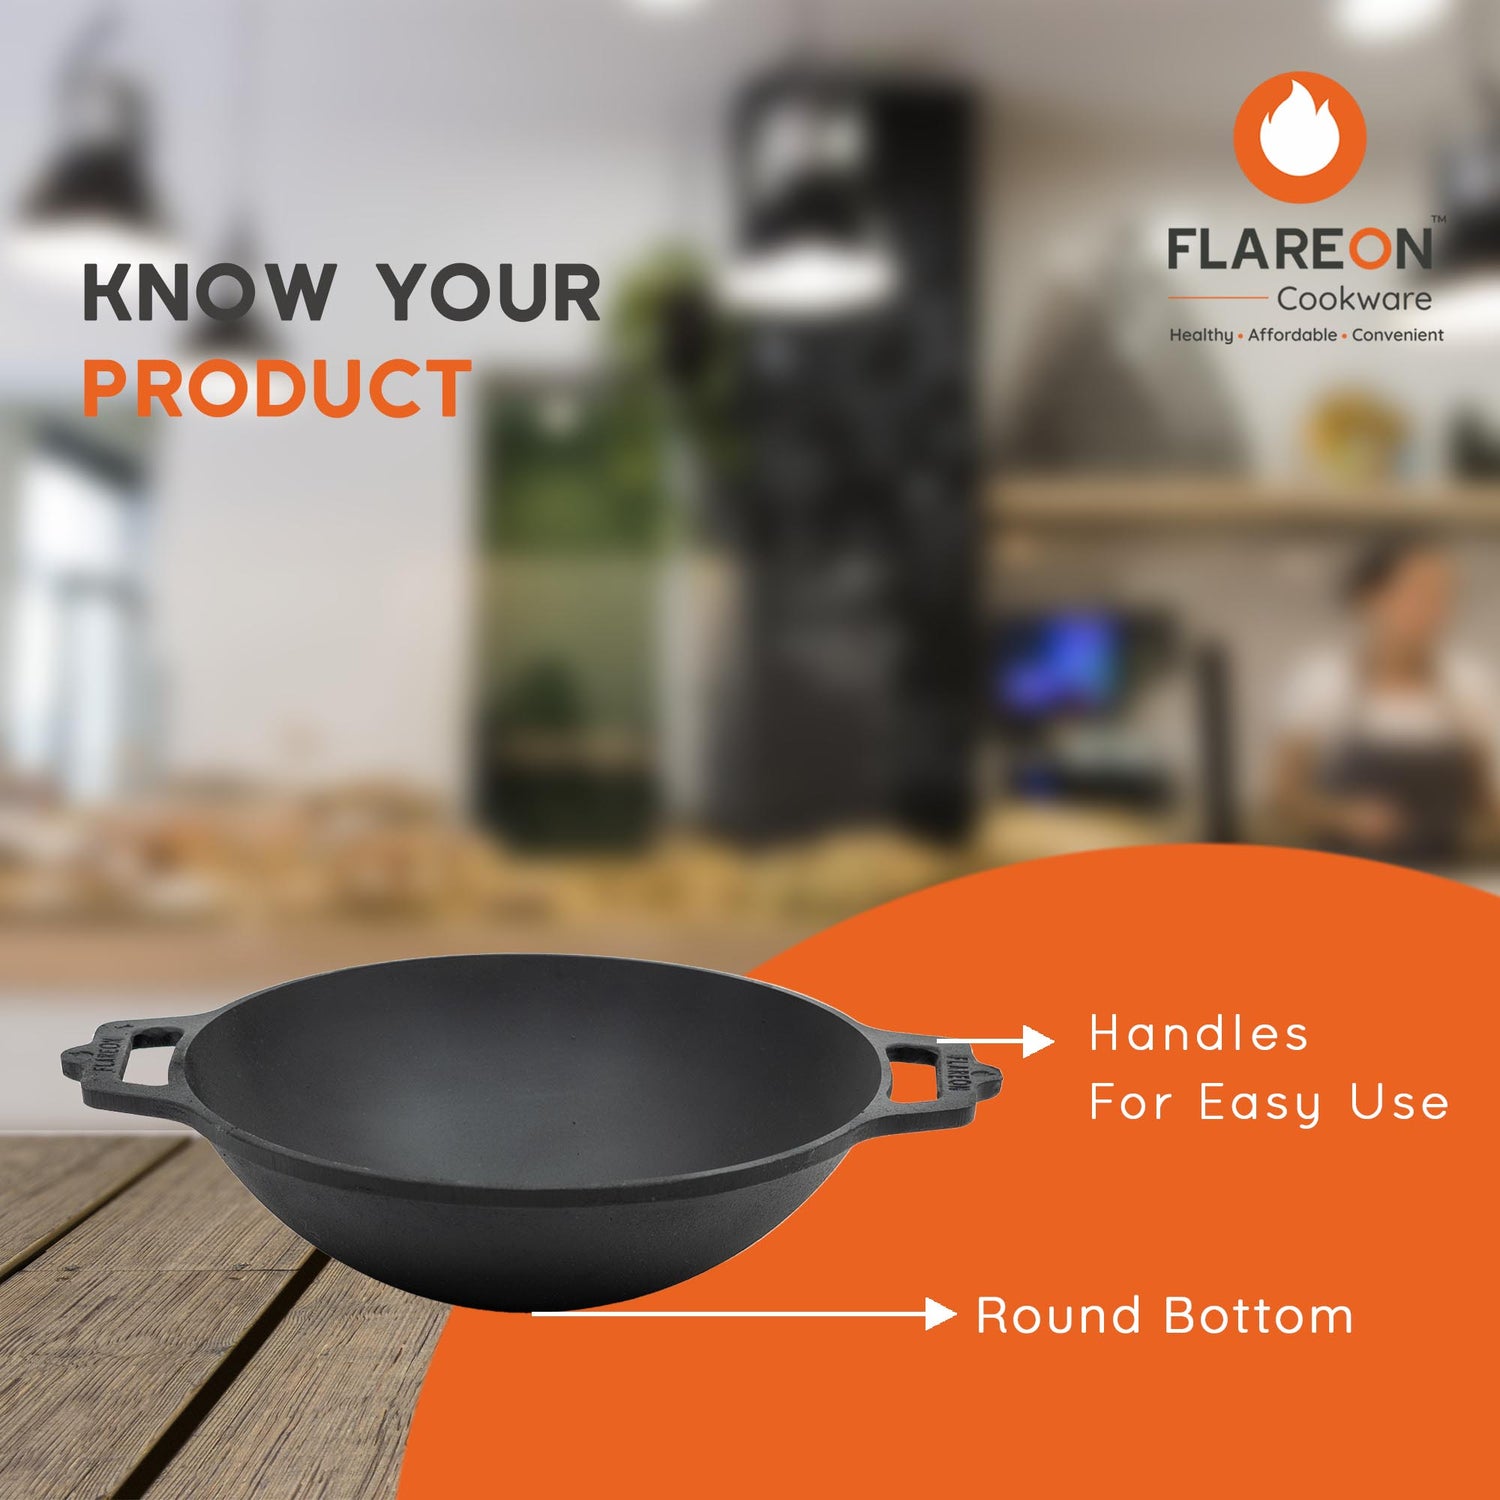 FlareOn's Cast Iron Kadai 10-Inch- Know Your Product